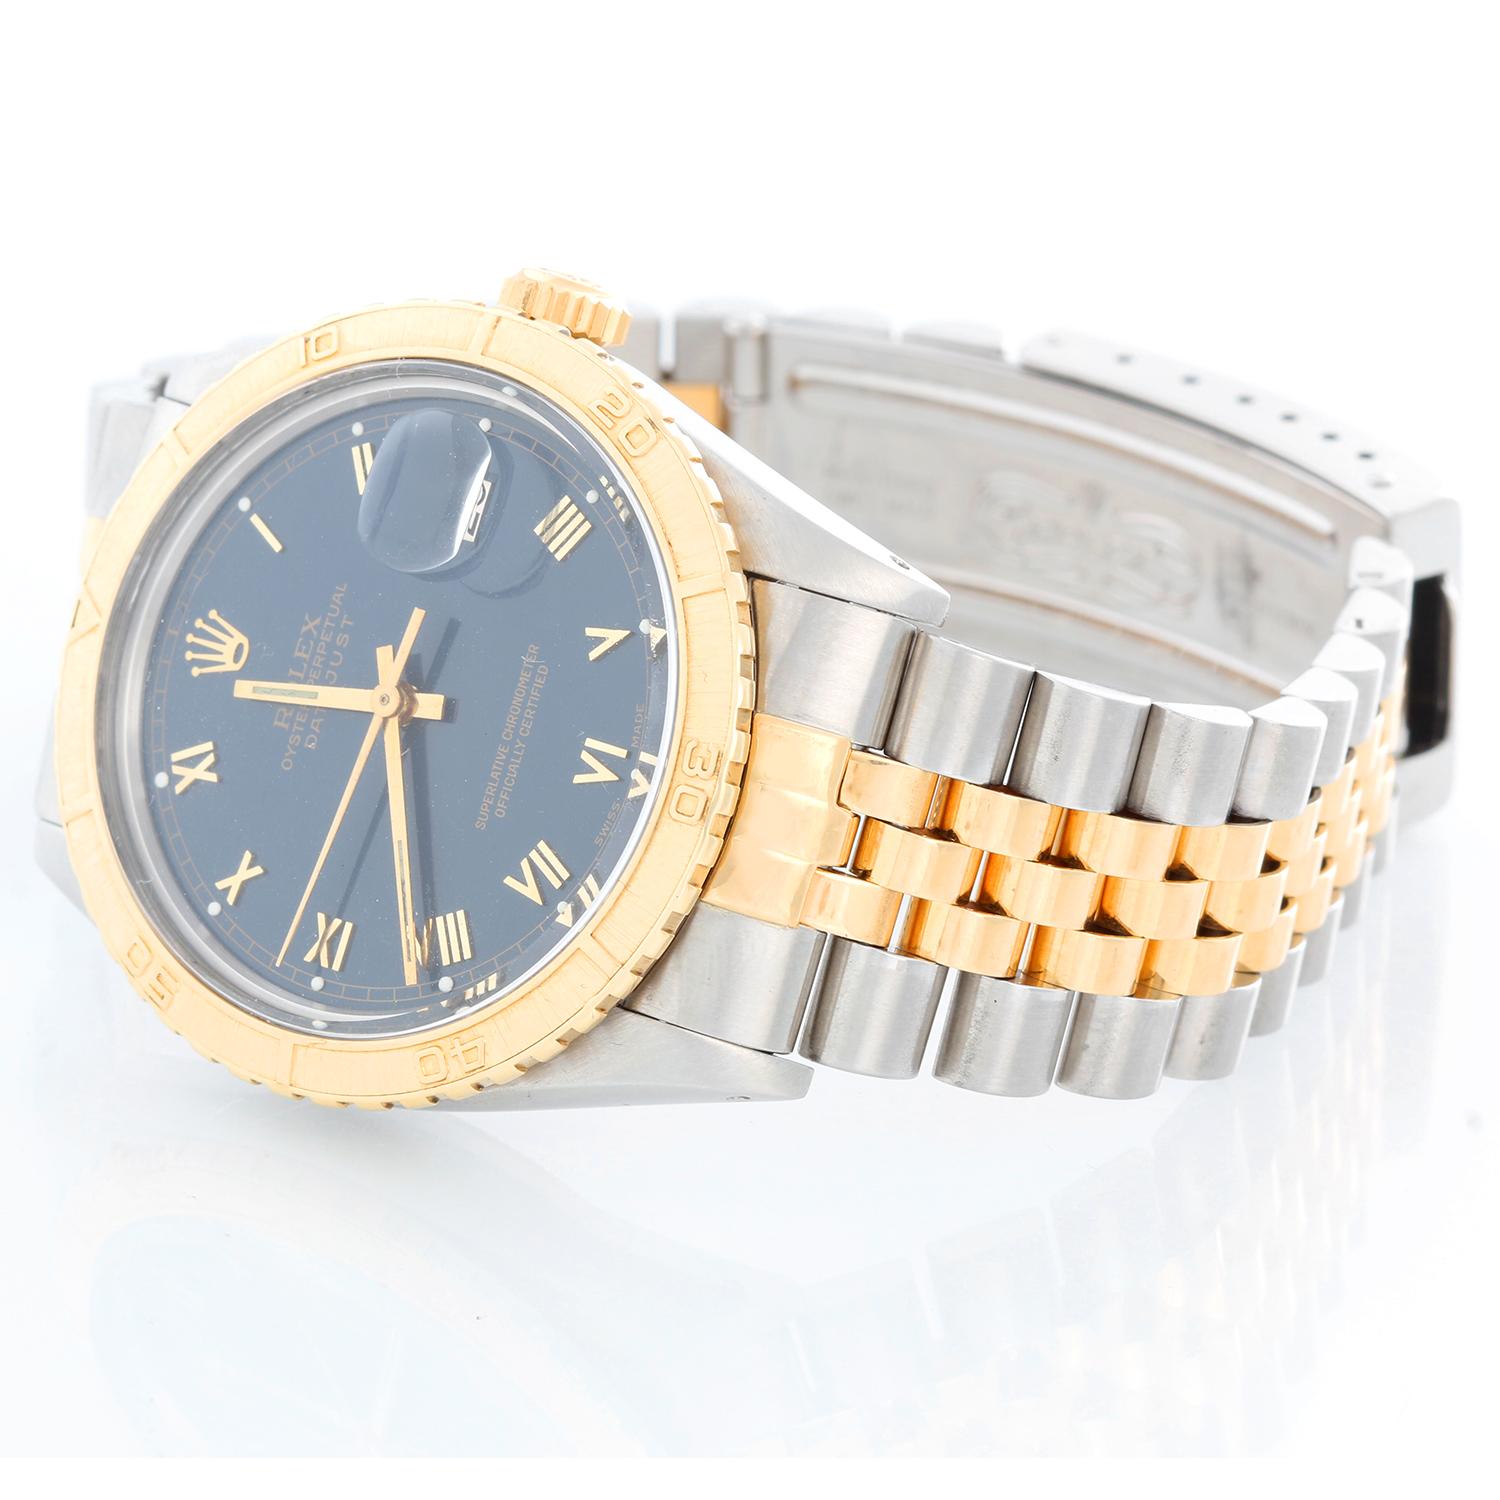 Rolex Turnograph Men's 2-Tone Watch 16253 - Automatic winding, Quickset, acrylic crystal. Stainless steel case with 18k yellow gold bezel. Blue dial with skinny hour markers. Stainless steel and 18k yellow gold Jubilee bracelet. Pre-owned with